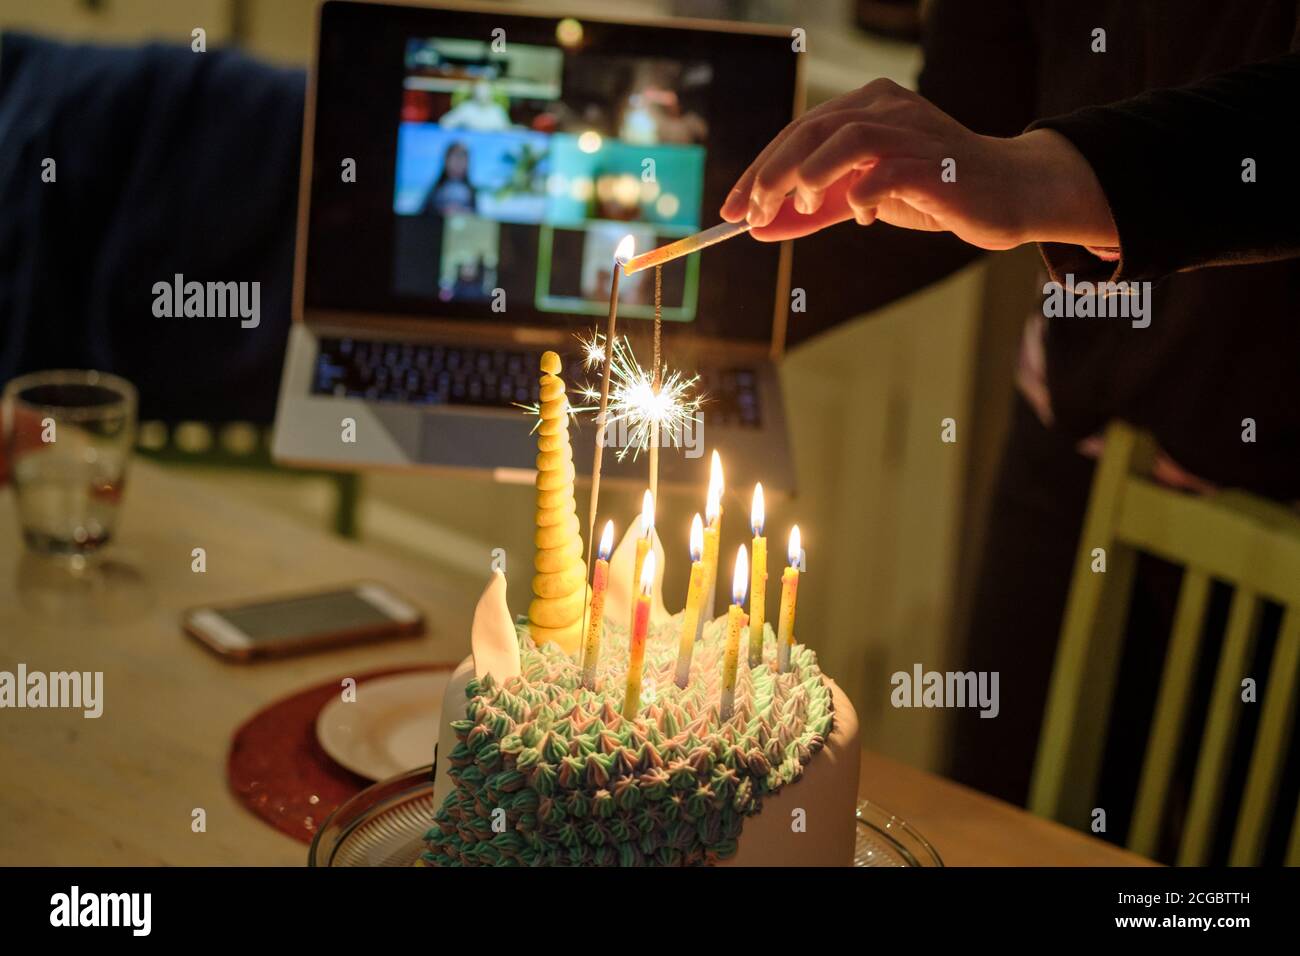 A child's Birthday party being held online (Zoom) during COVID-19 lockdown, Melbourne Australia Stock Photo